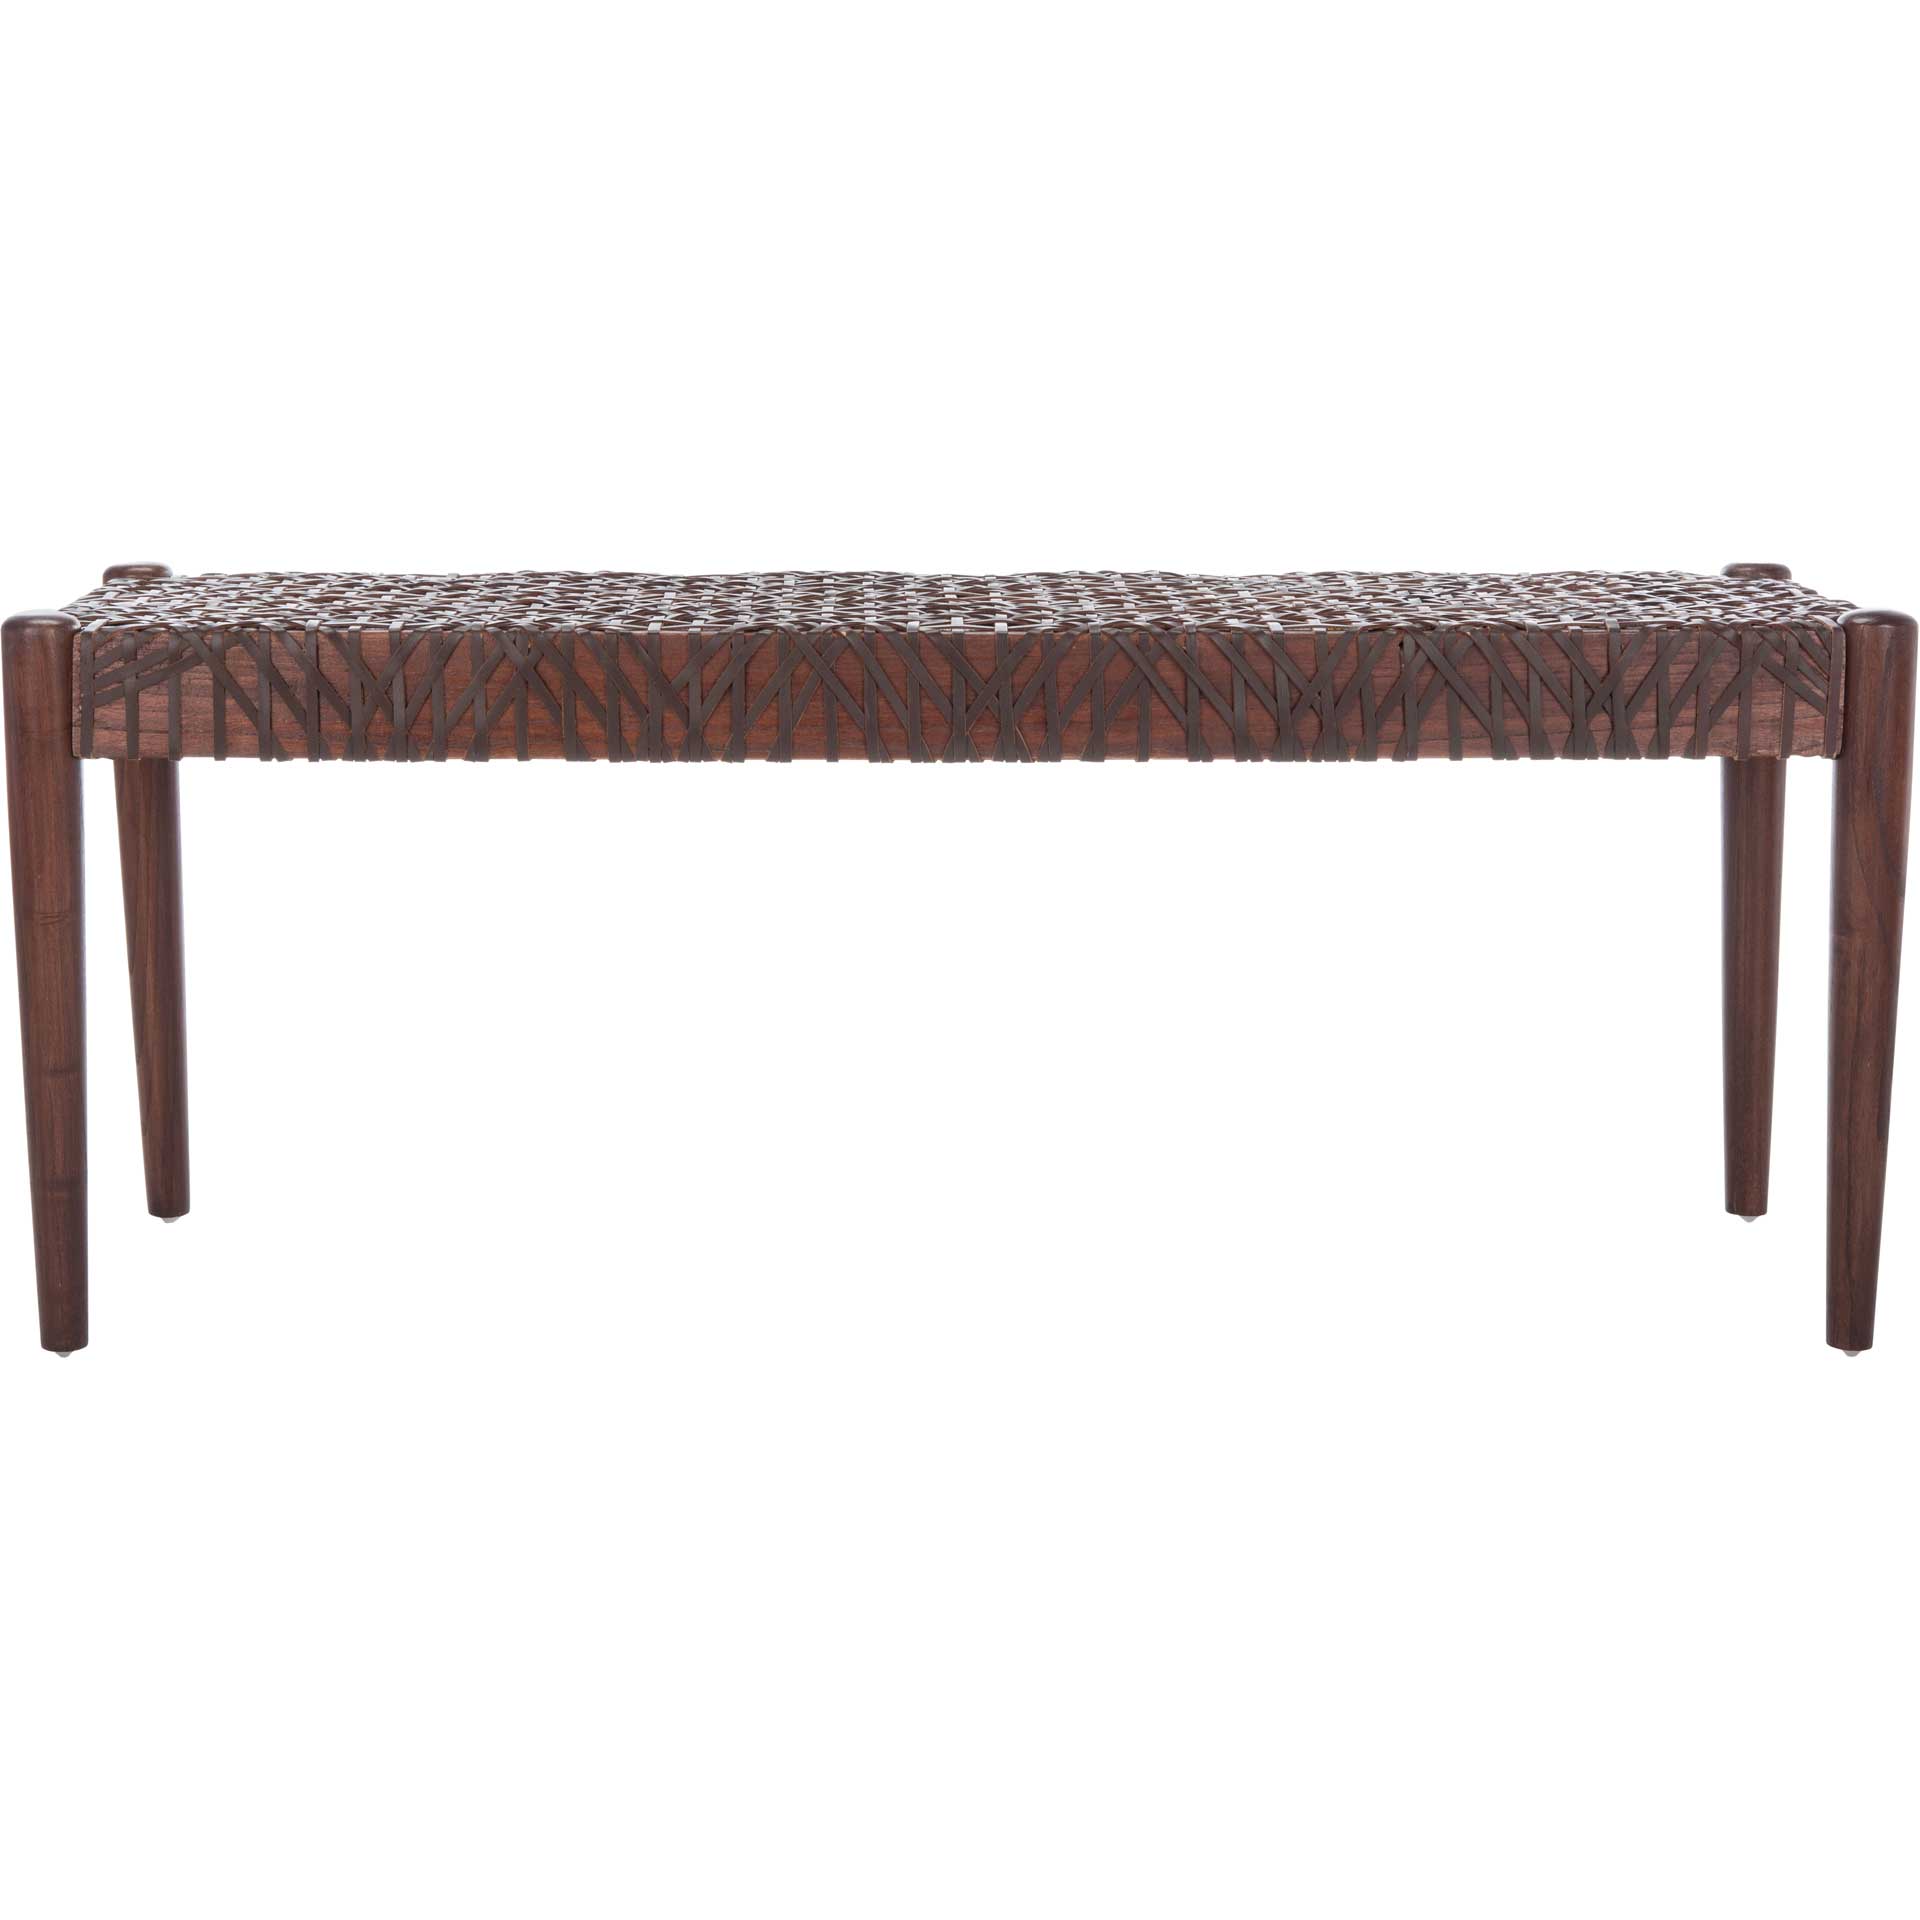 Baize Leather Weave Bench Brown/Brown